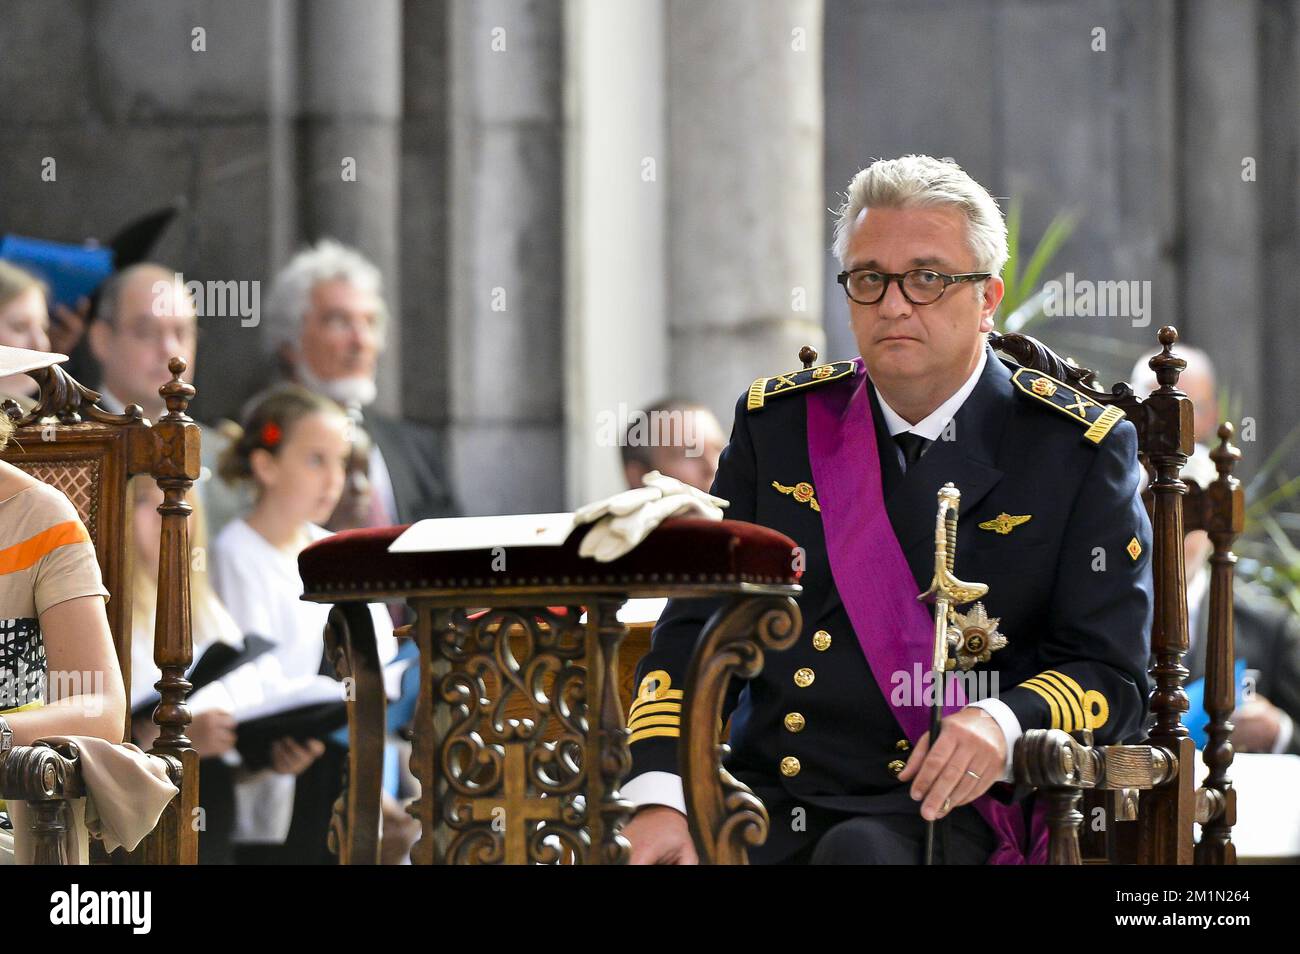 20120721 - LIEGE, BELGIUM: Prince Laurent of Belgium pictured during the Te Deum mass, on the occasion of today's Belgian National Day, at the Cathedrale Saint-Paul (Sint-Pauluskathedraal) cathedral, Saturday 21 July 2012 in Liege. BELGA PHOTO NICOLAS LAMBERT Stock Photo